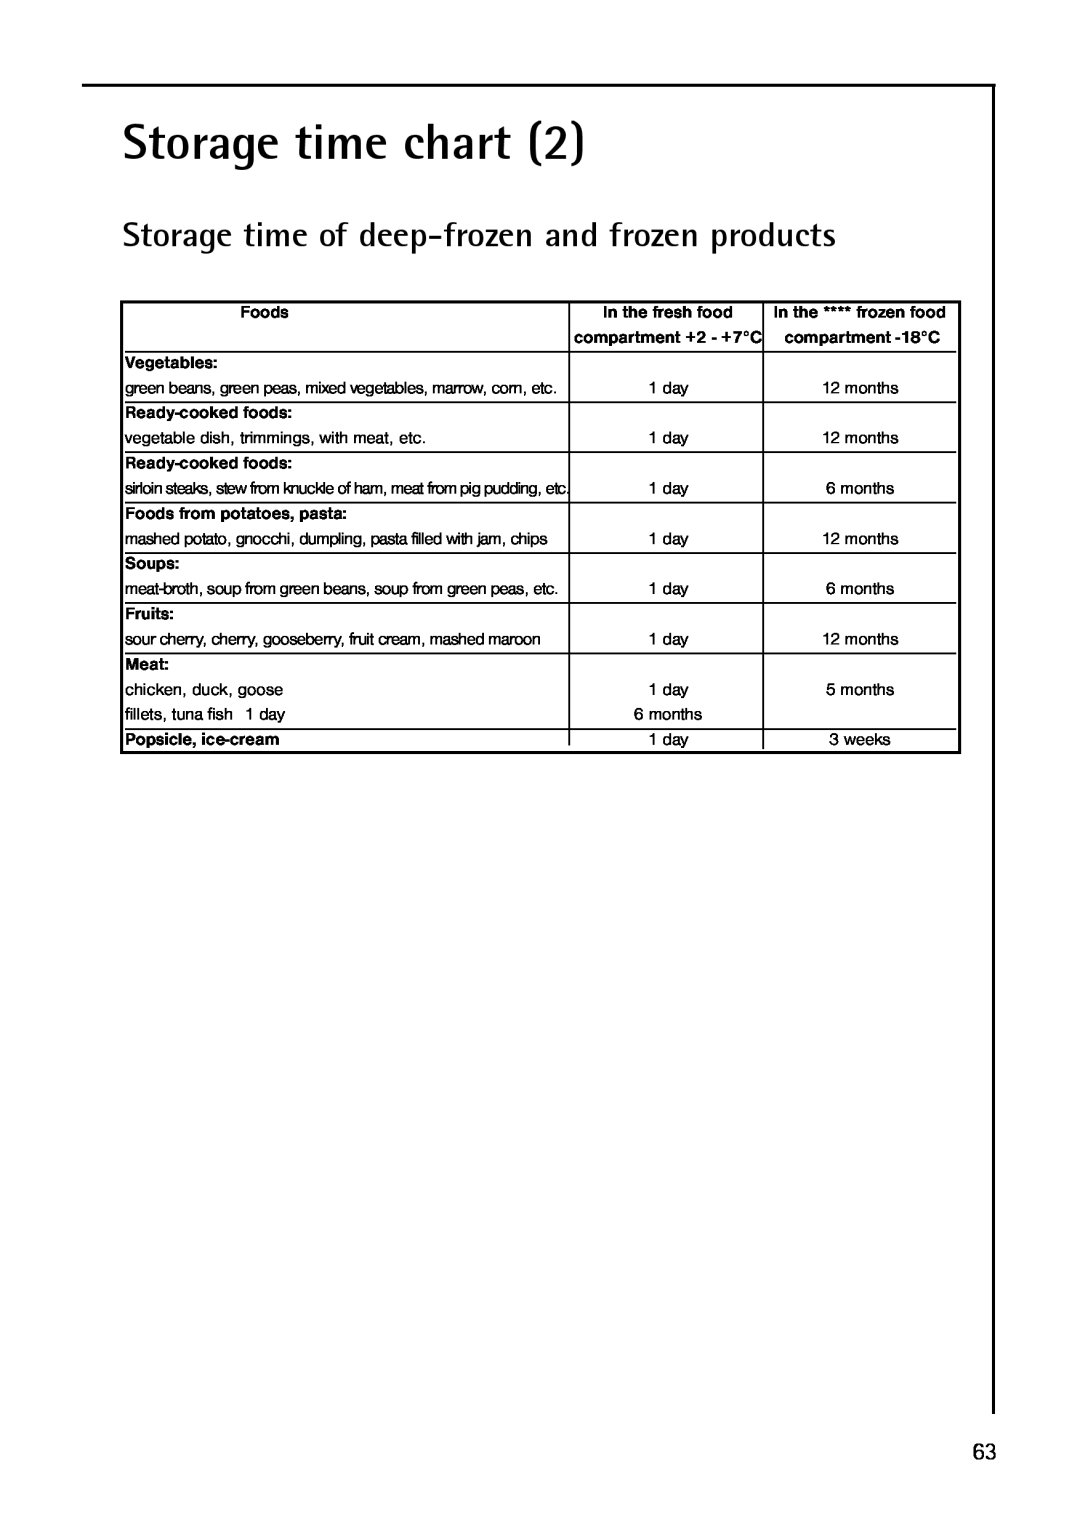 AEG S75348 KG8, S 75348 KG, S 75388 KG8 manual Storage time of deep-frozenand frozen products, Storage time chart 